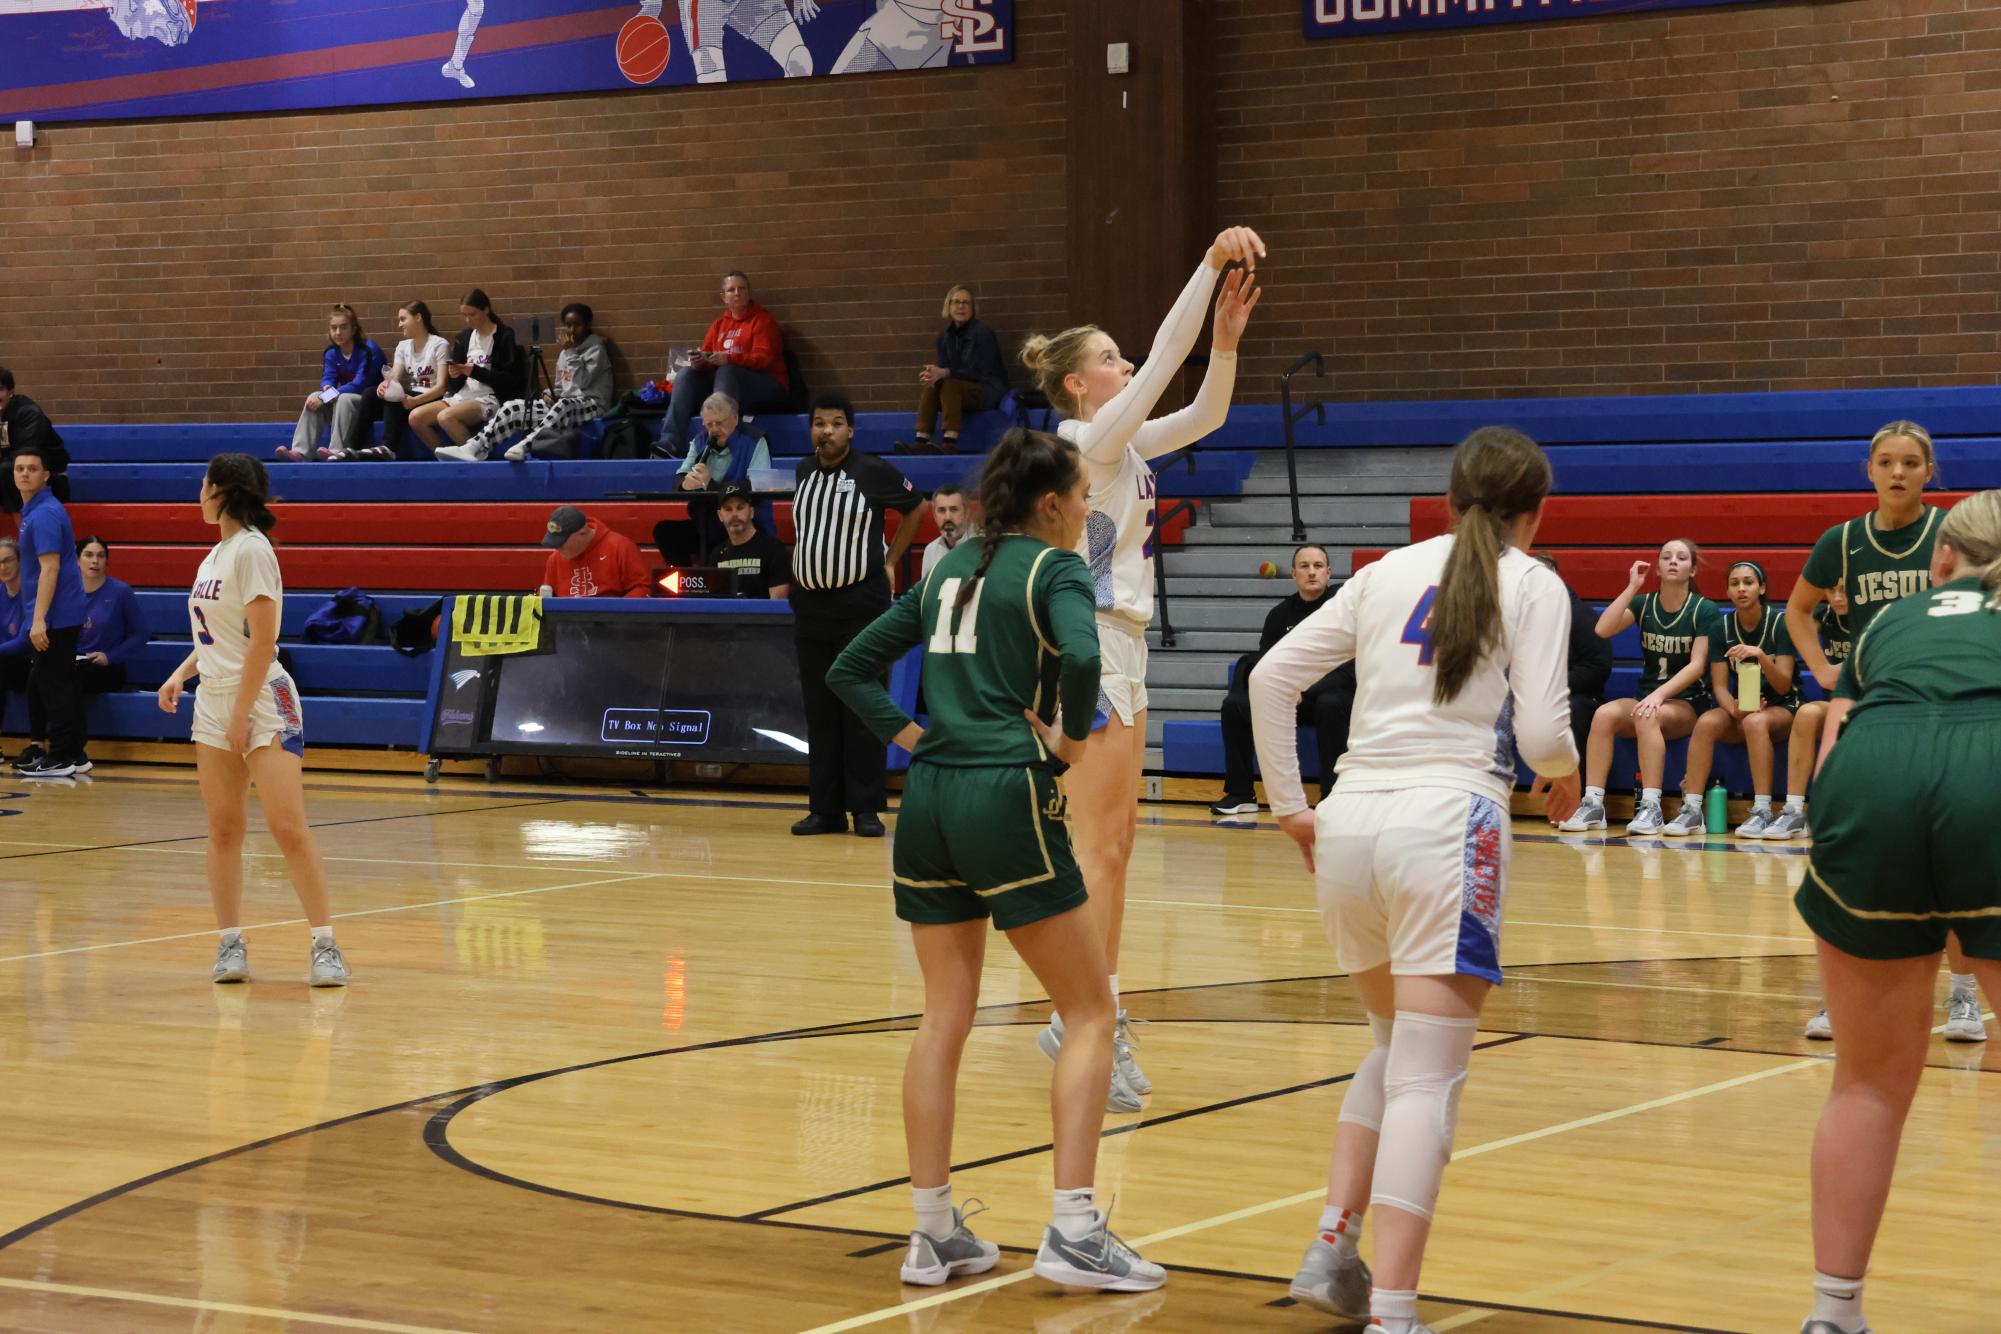 Photo+Story%3A+La+Salle+Girls+Basketball+Team+Faces+Off+Against+Jesuit%2C+Ending+in+Loss